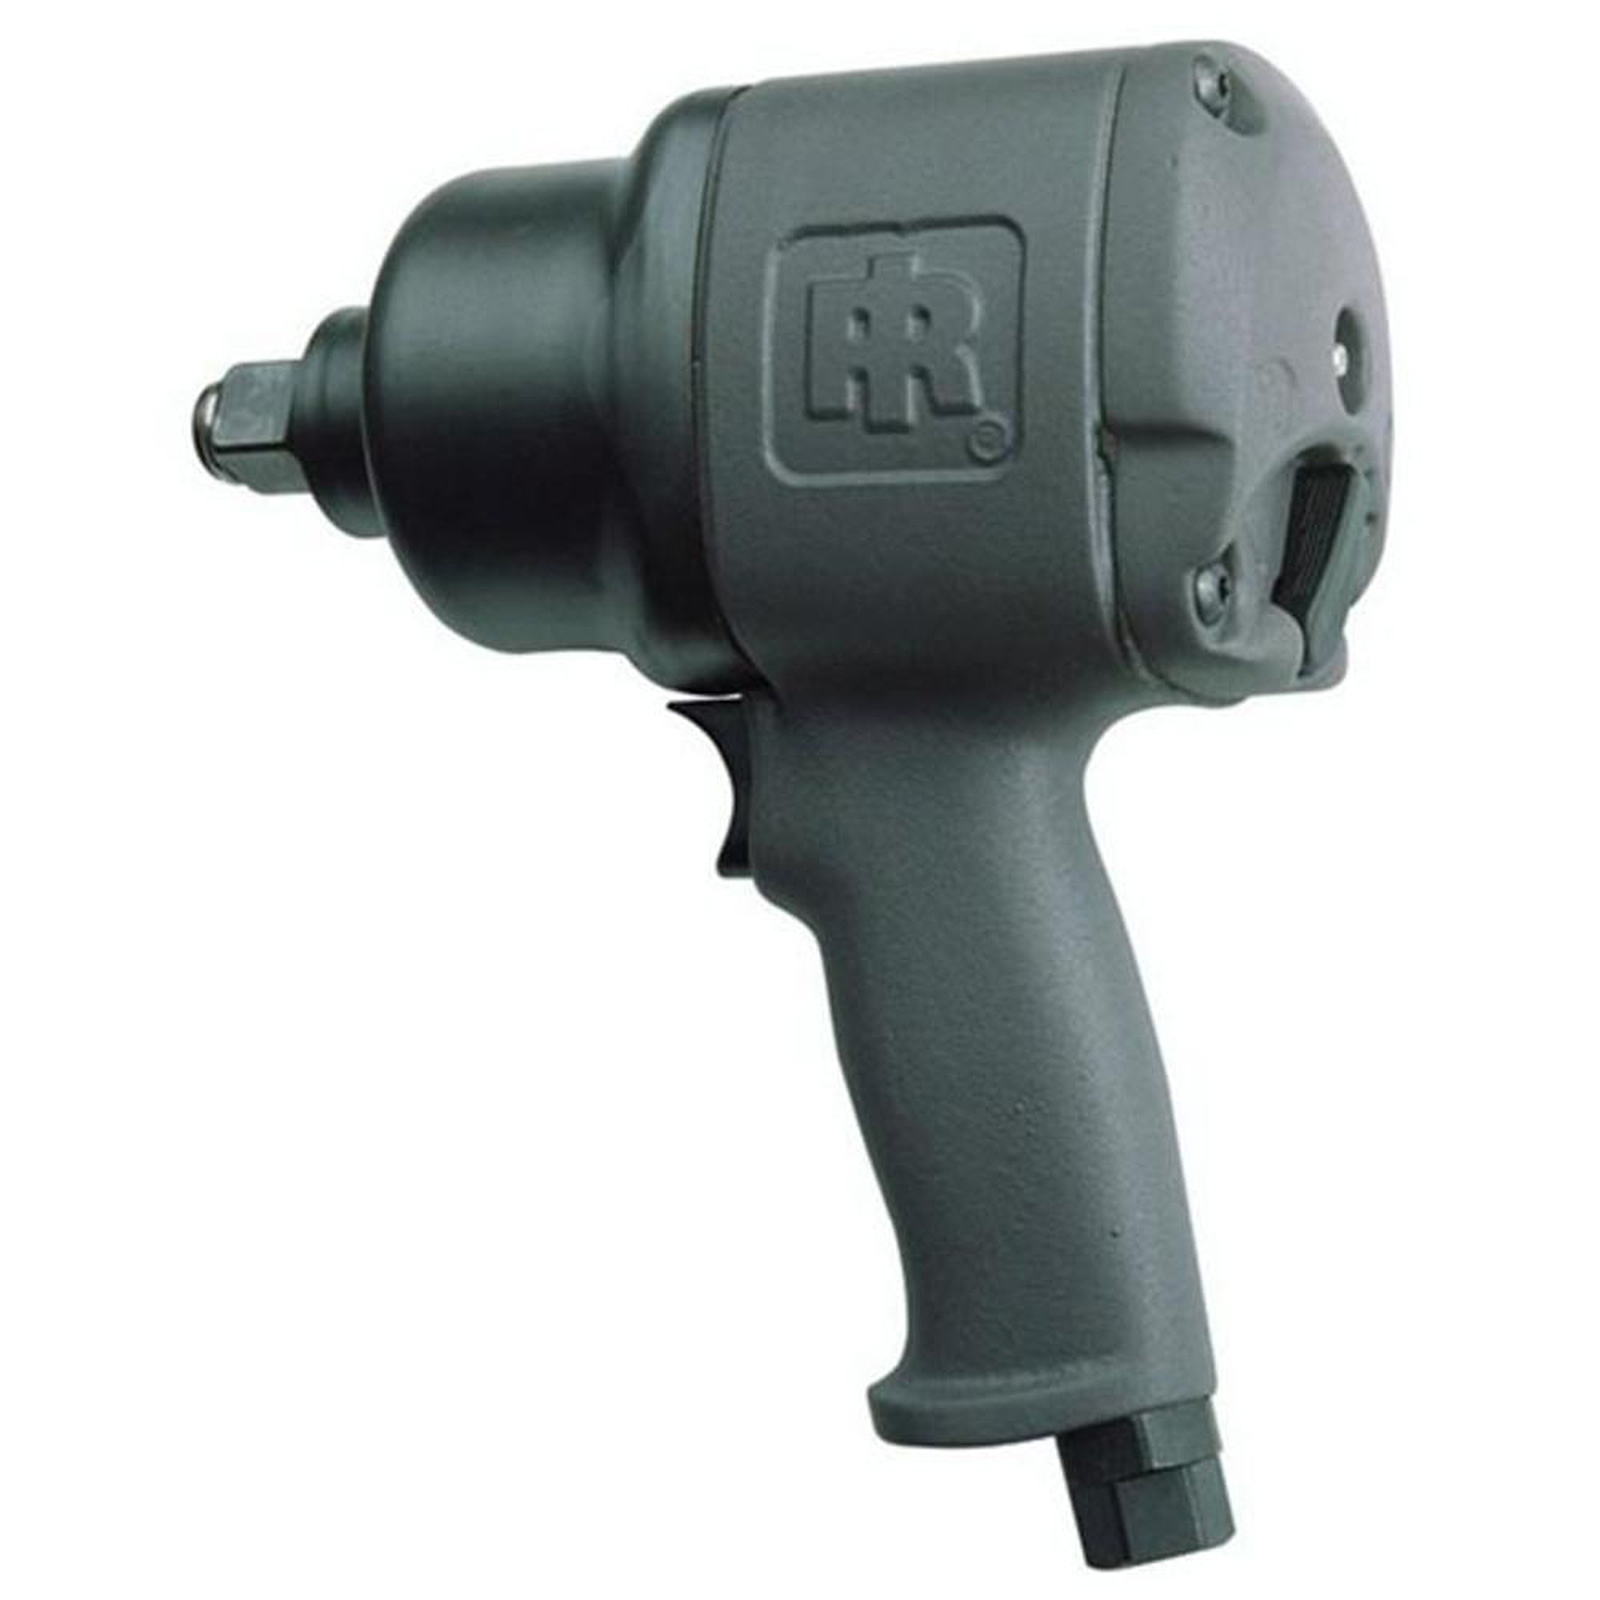 Ingersoll Rand 2161XP 3/4in. Drive Air Impact Wrench